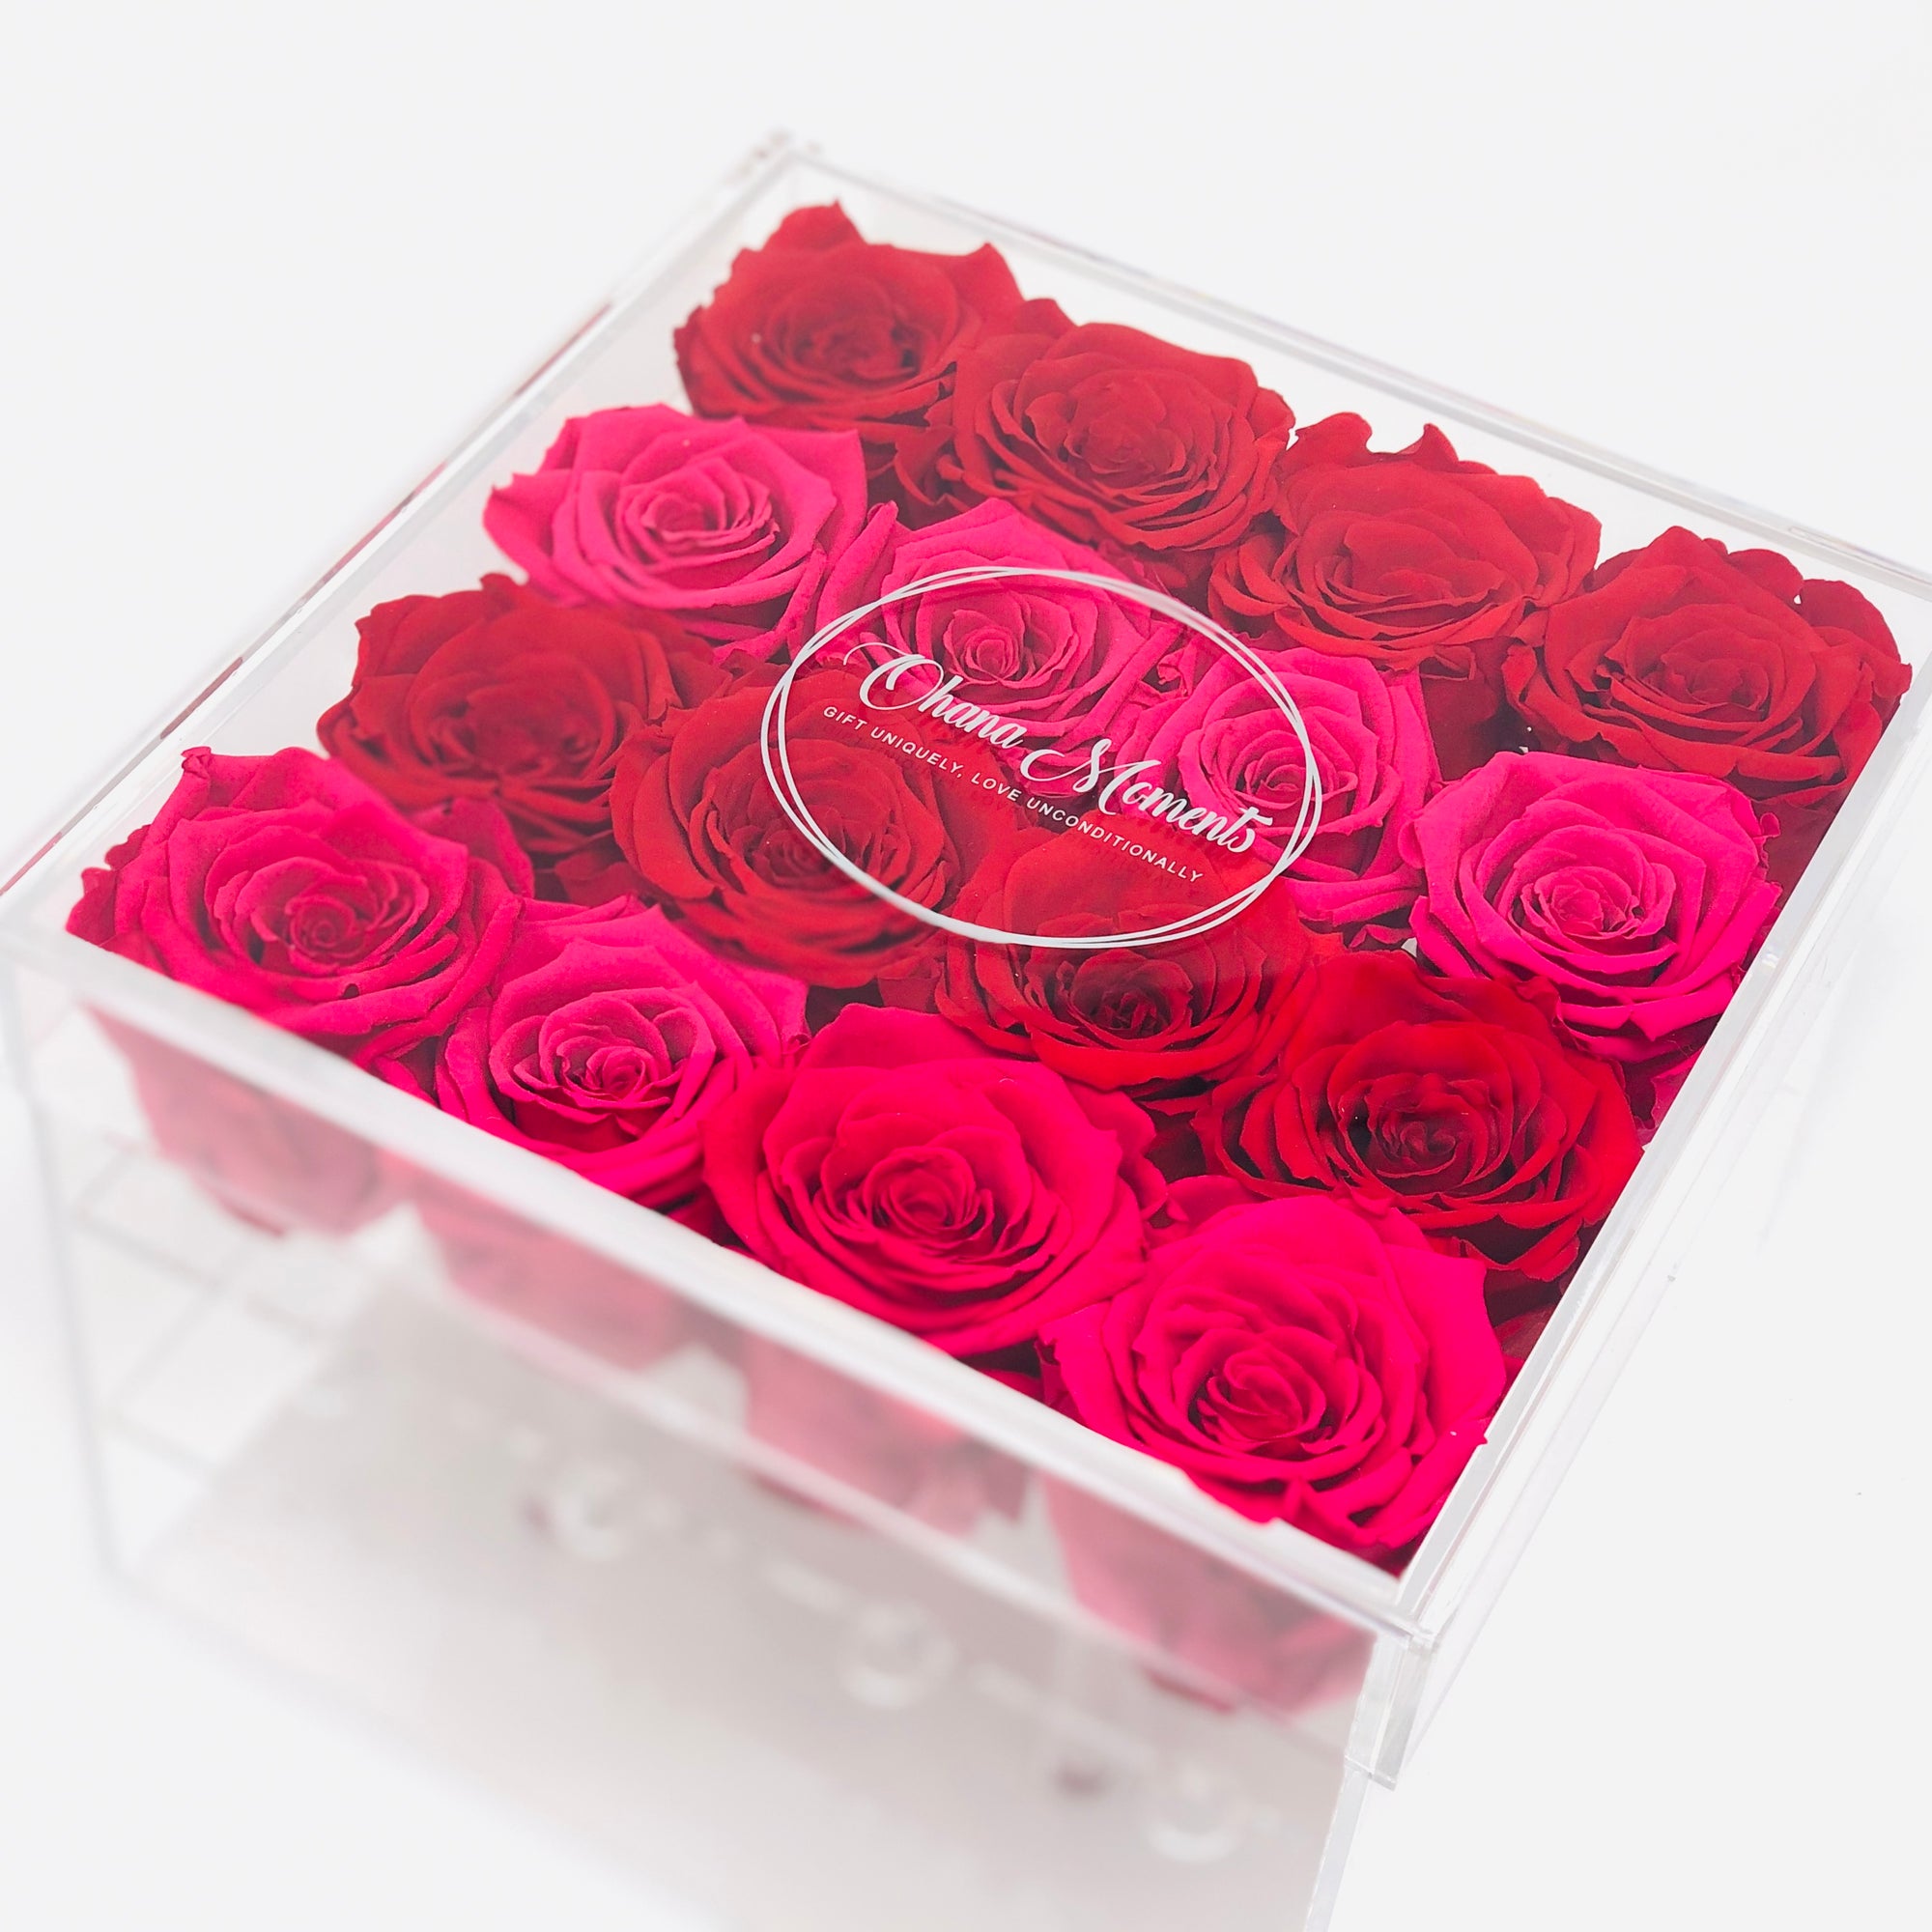 Forever Rose Box Arrangements with Nationwide Delivery